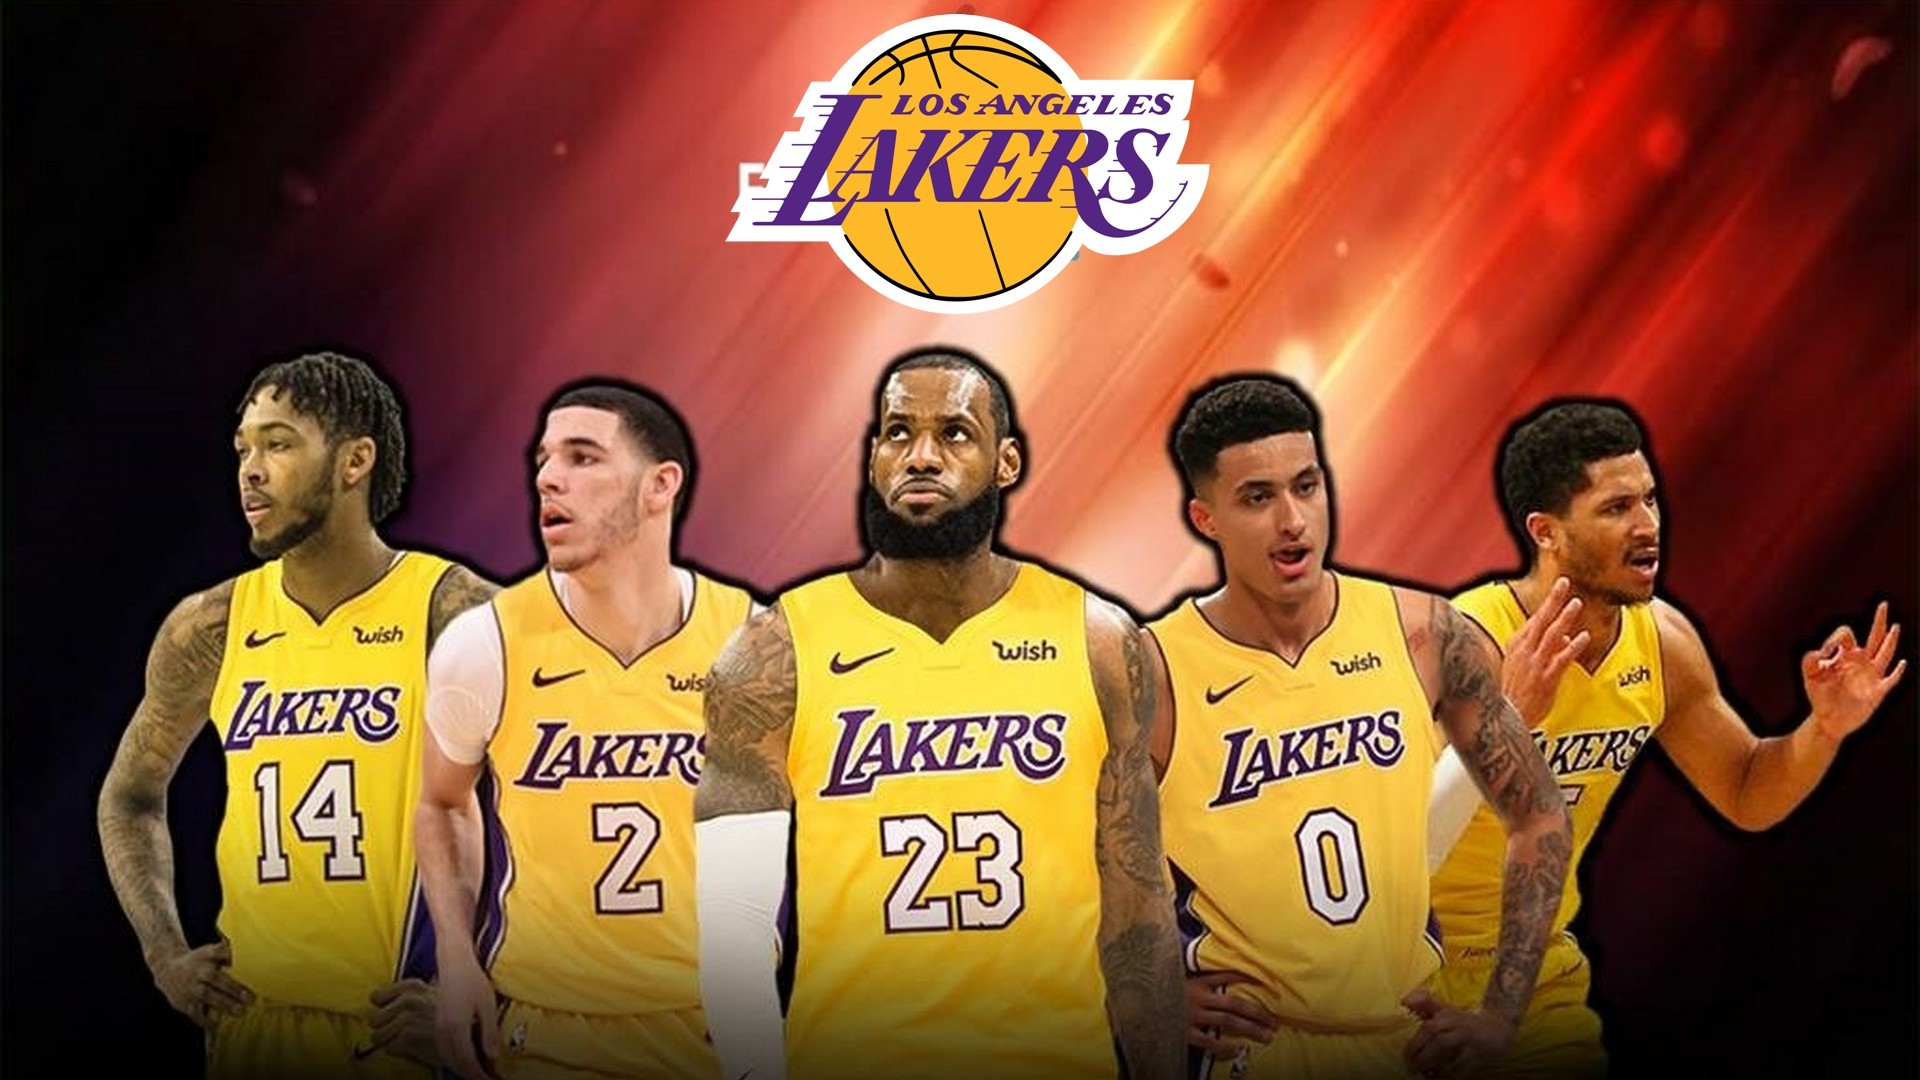 1920x1080 LA Lakers Wallpaper HD with image dimensions  pixel. You can make  this wallpaper for